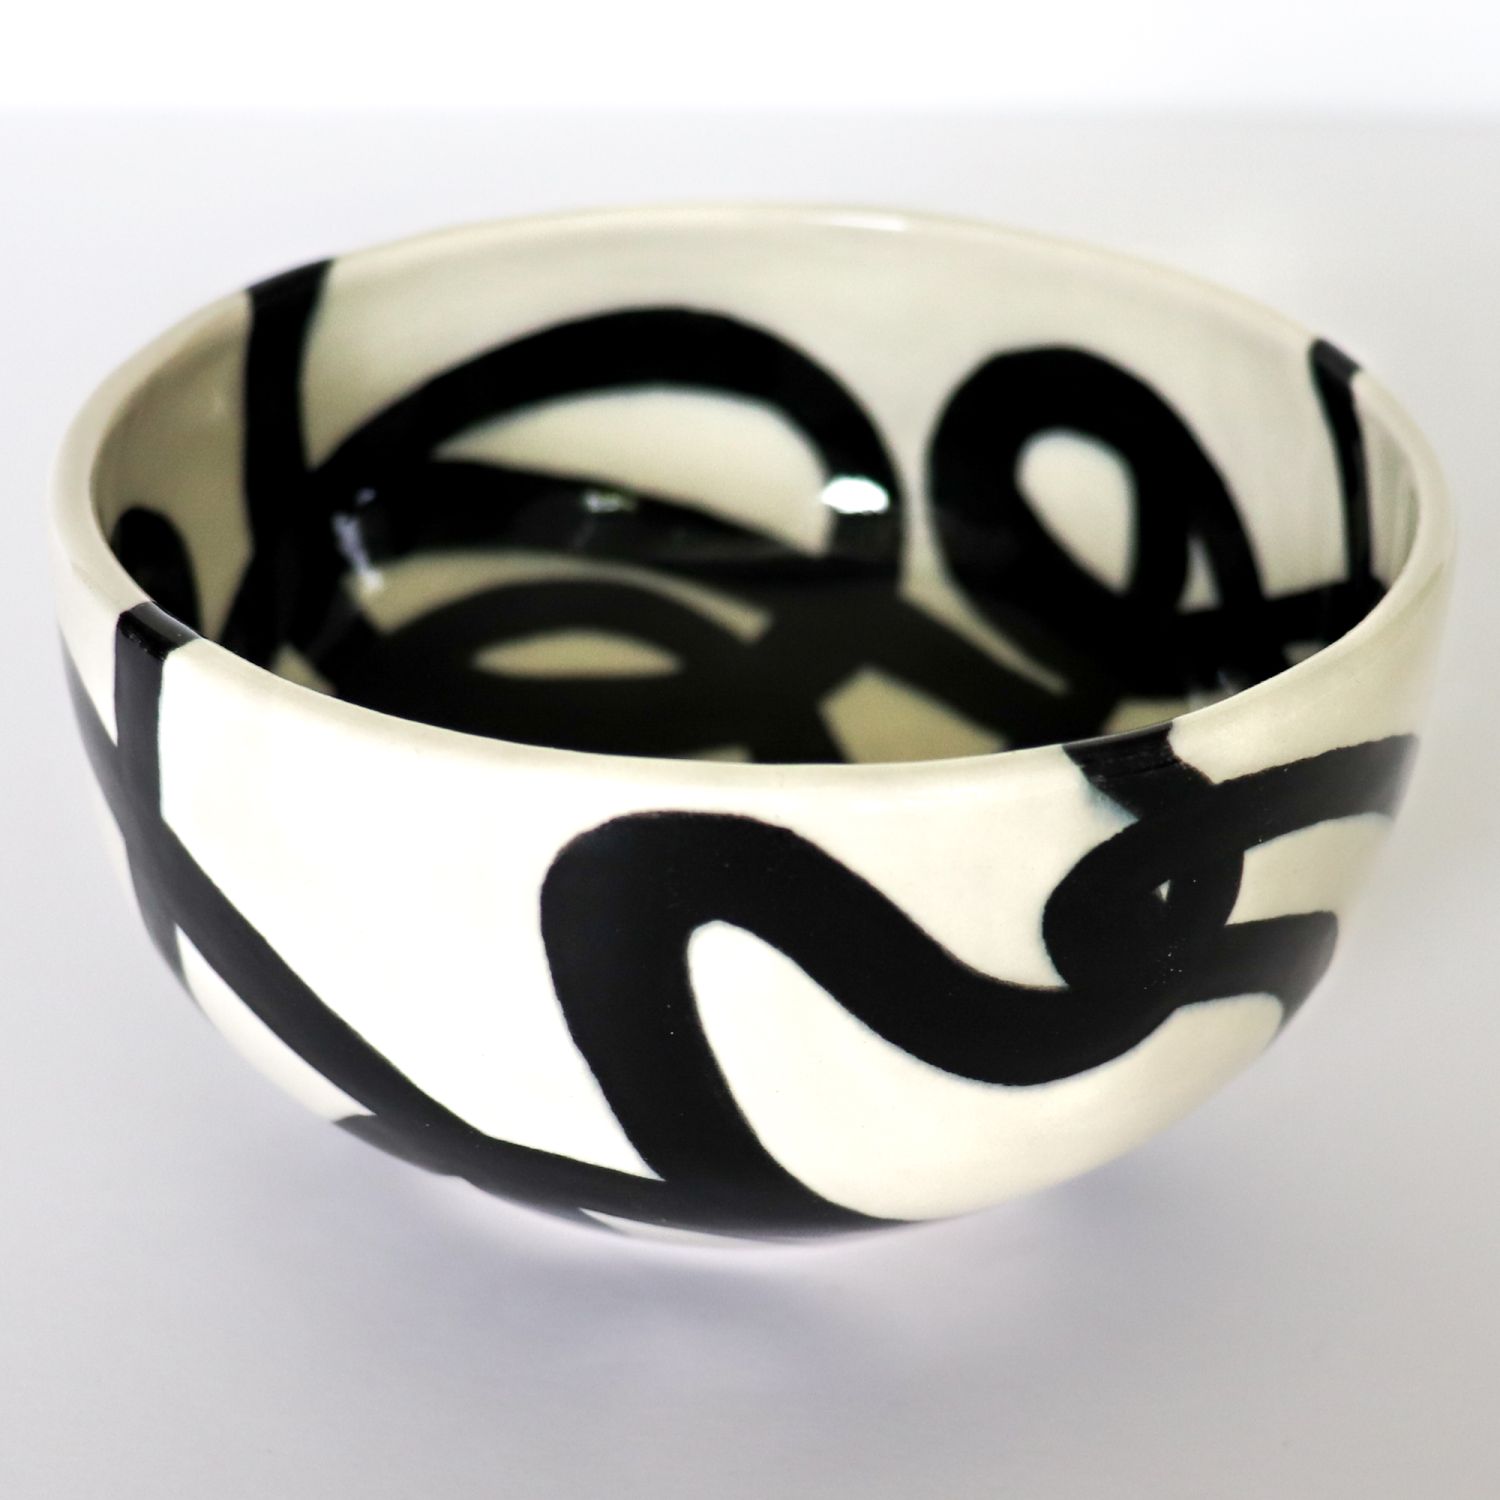 Alana Marcoccia: Interconnected Nesting Bowl – Small Product Image 7 of 9